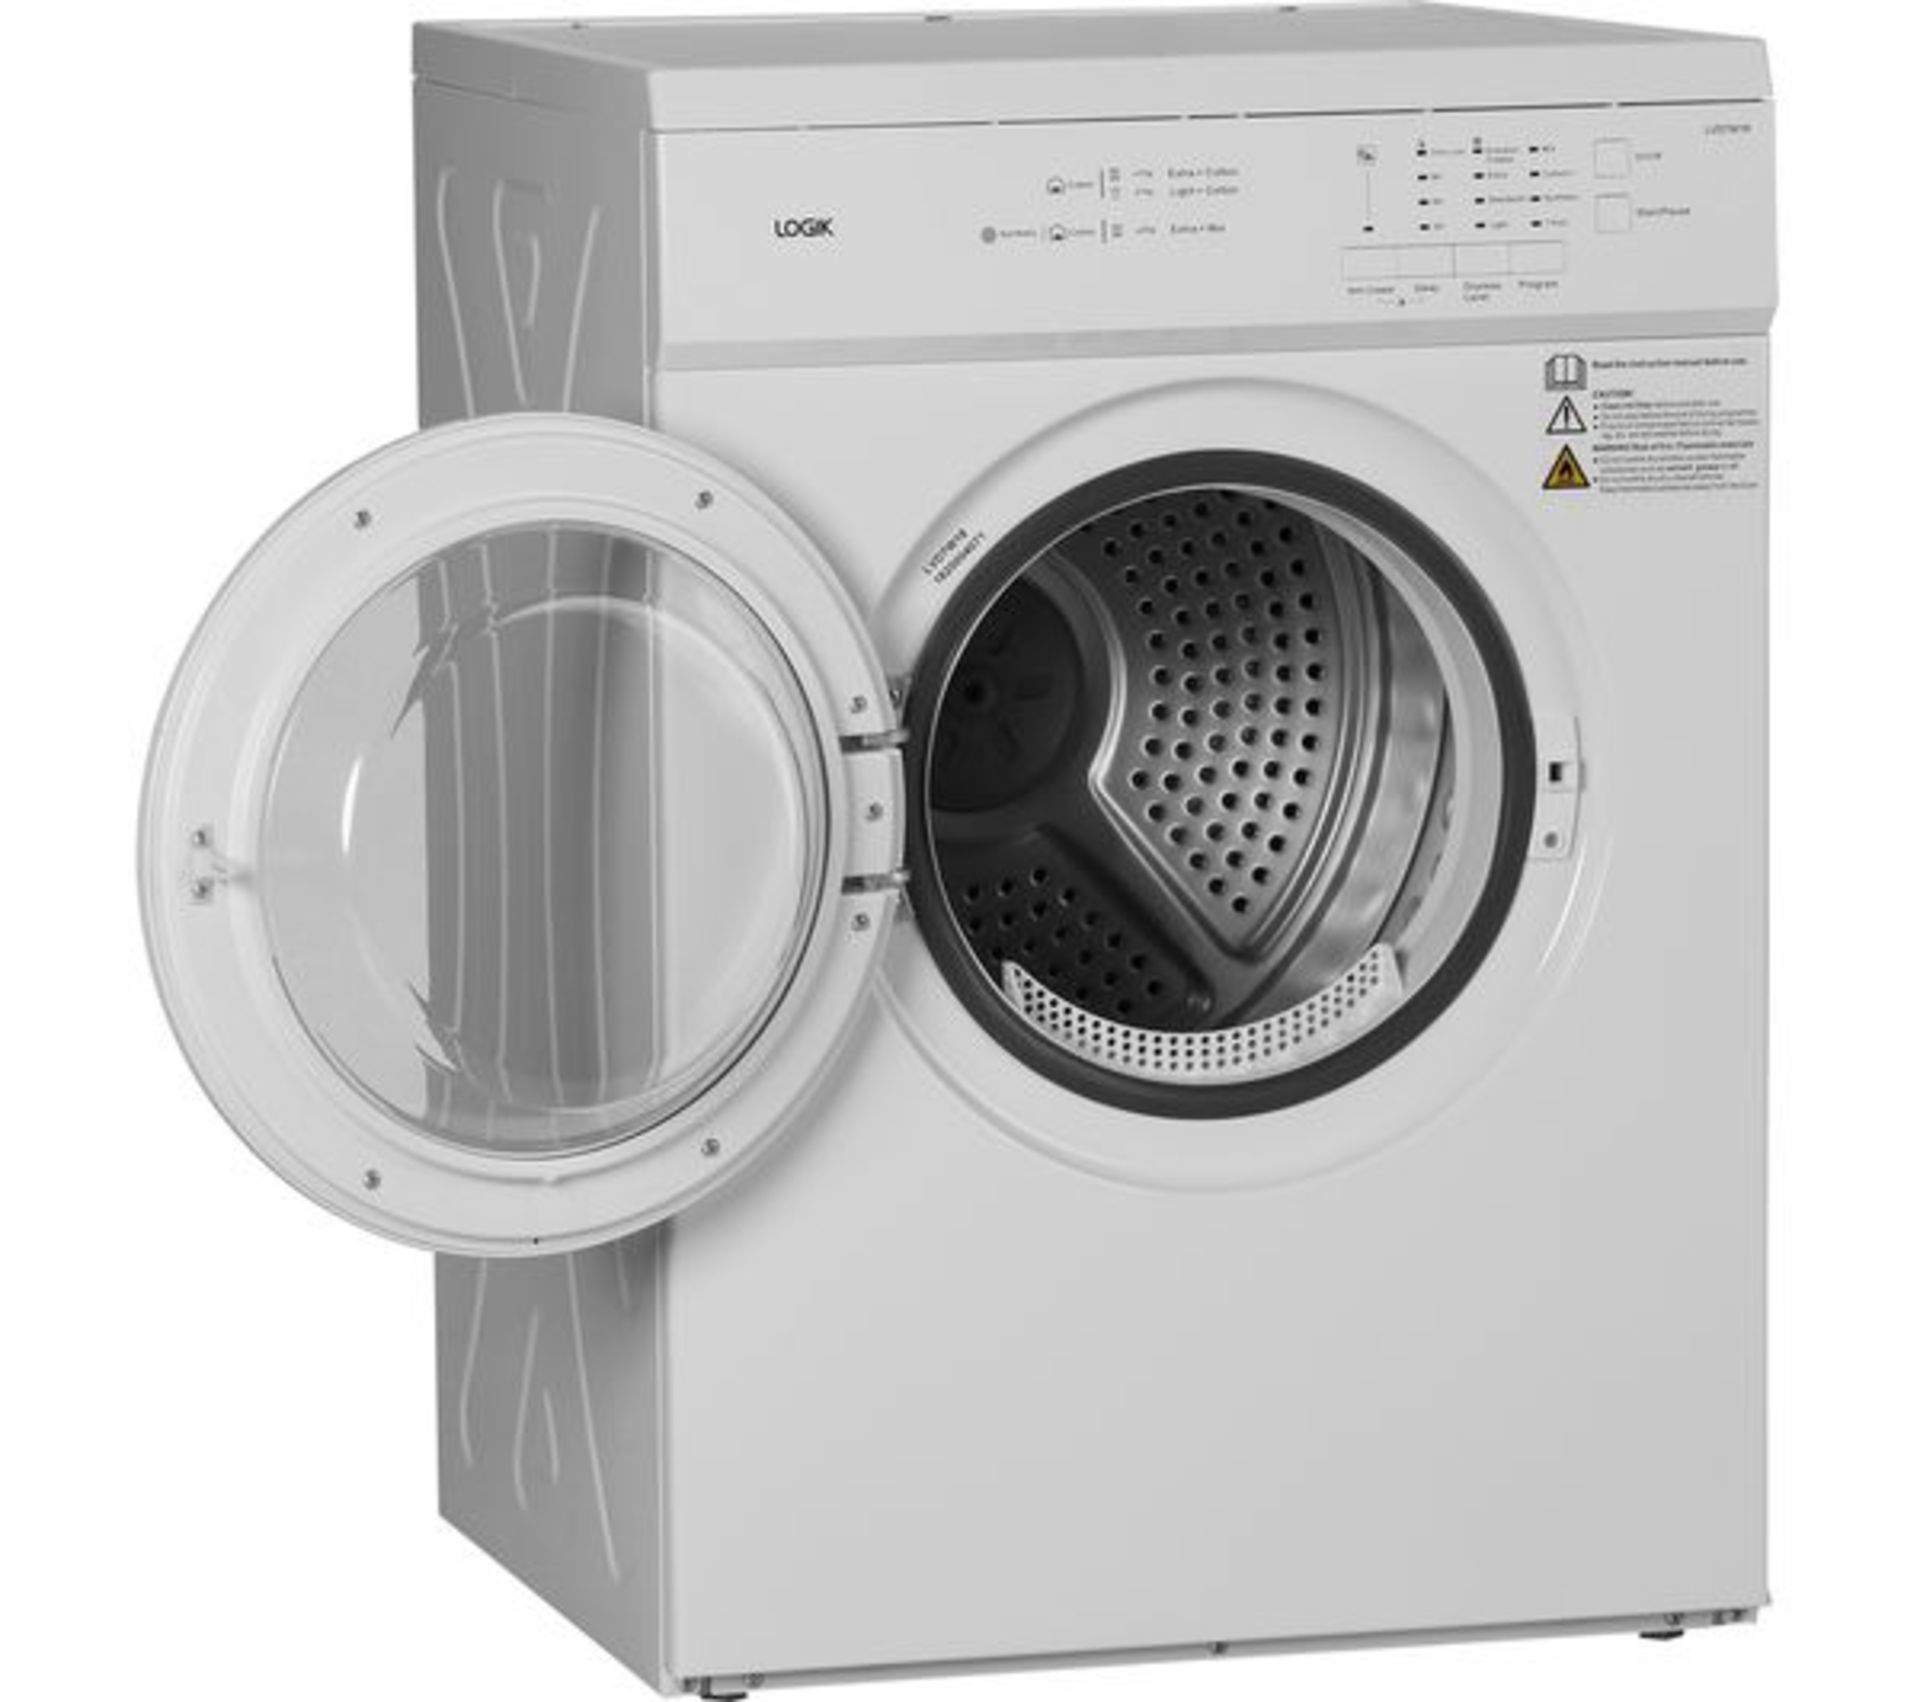 Pallet of Mixed Laundry White Goods. Brands include Logik & Kenwood. Latest selling price £799.94 - Image 2 of 5